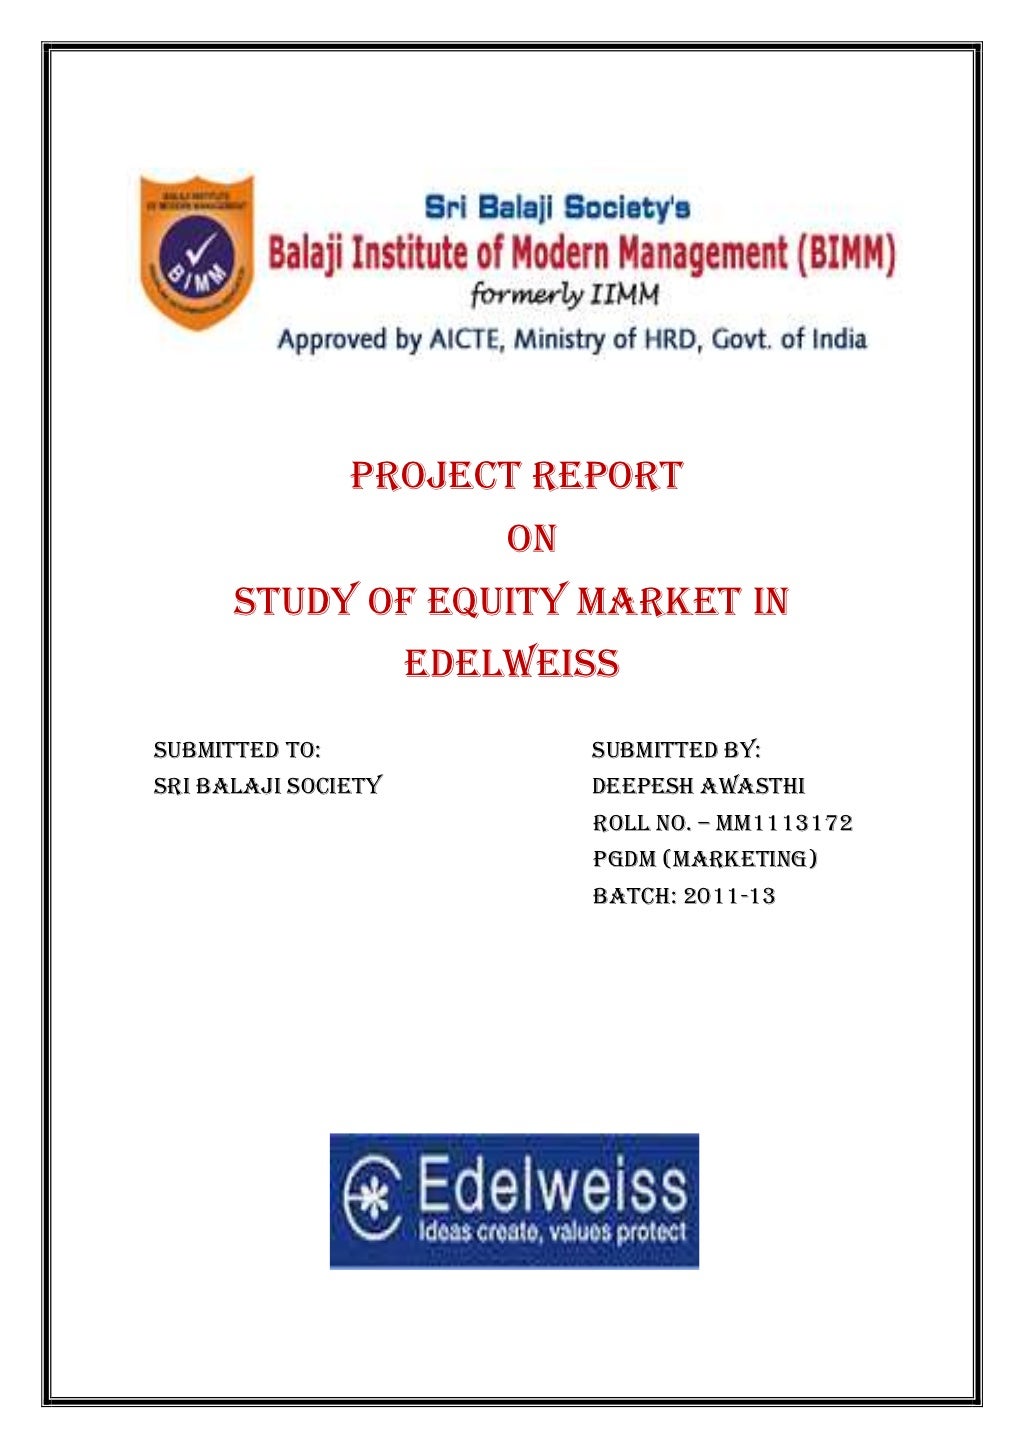 Analysis of equity market in edelweiss